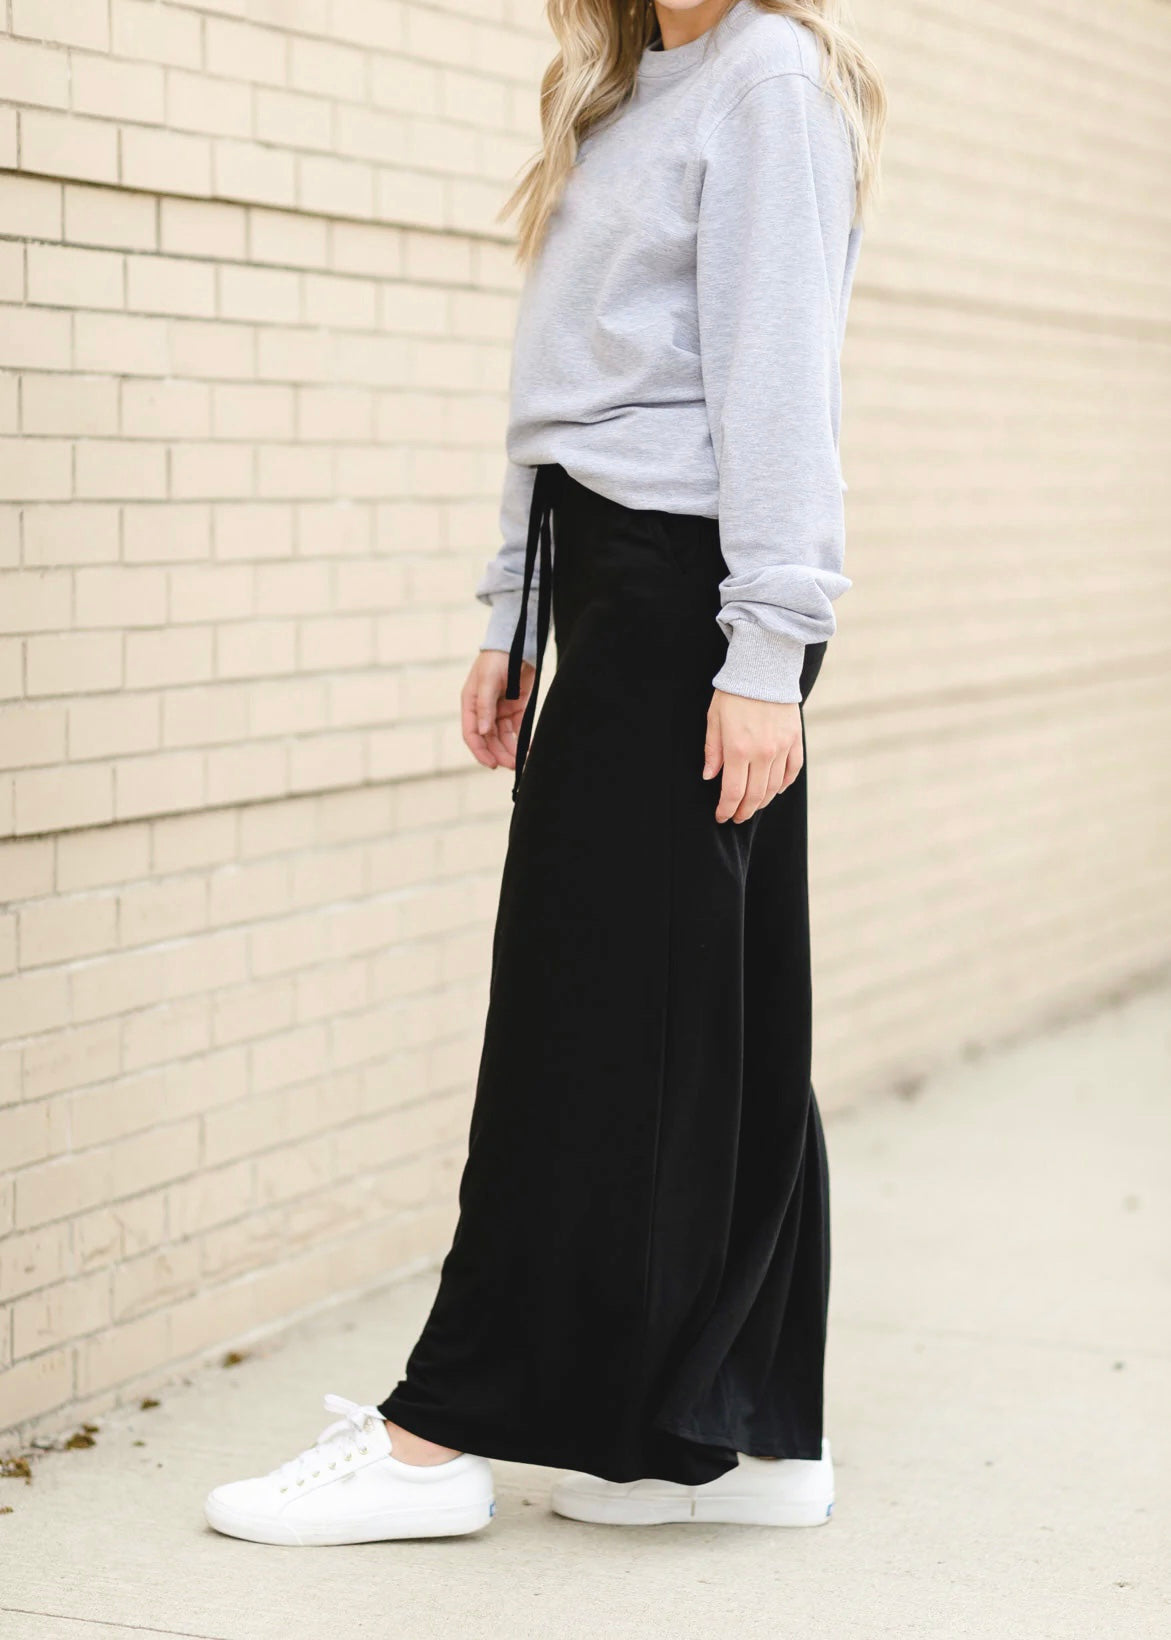 Bottom half view of a young woman wearing a solid black Maxi Skirt with Pockets featuring a Soft & Stretchy Premium Fabric Blend, Adjustable Drawstring Tie Waist, and Pockets. Available in sizes S-3XL in both solid Black or Navy Blue. Discover our Best Selling All-year All-season Maxi Skirt for every body shape & size.